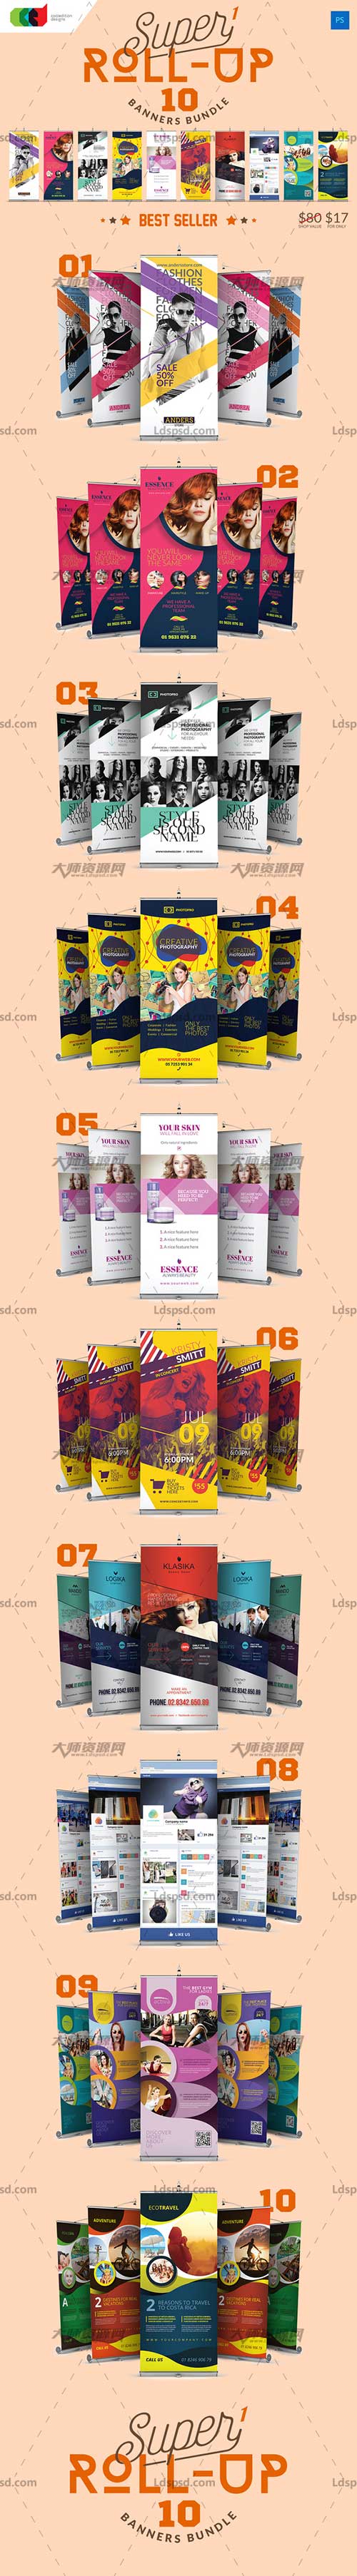 Super 1 - Roll-Up Banners Bundle,10个易拉宝/X展架模板